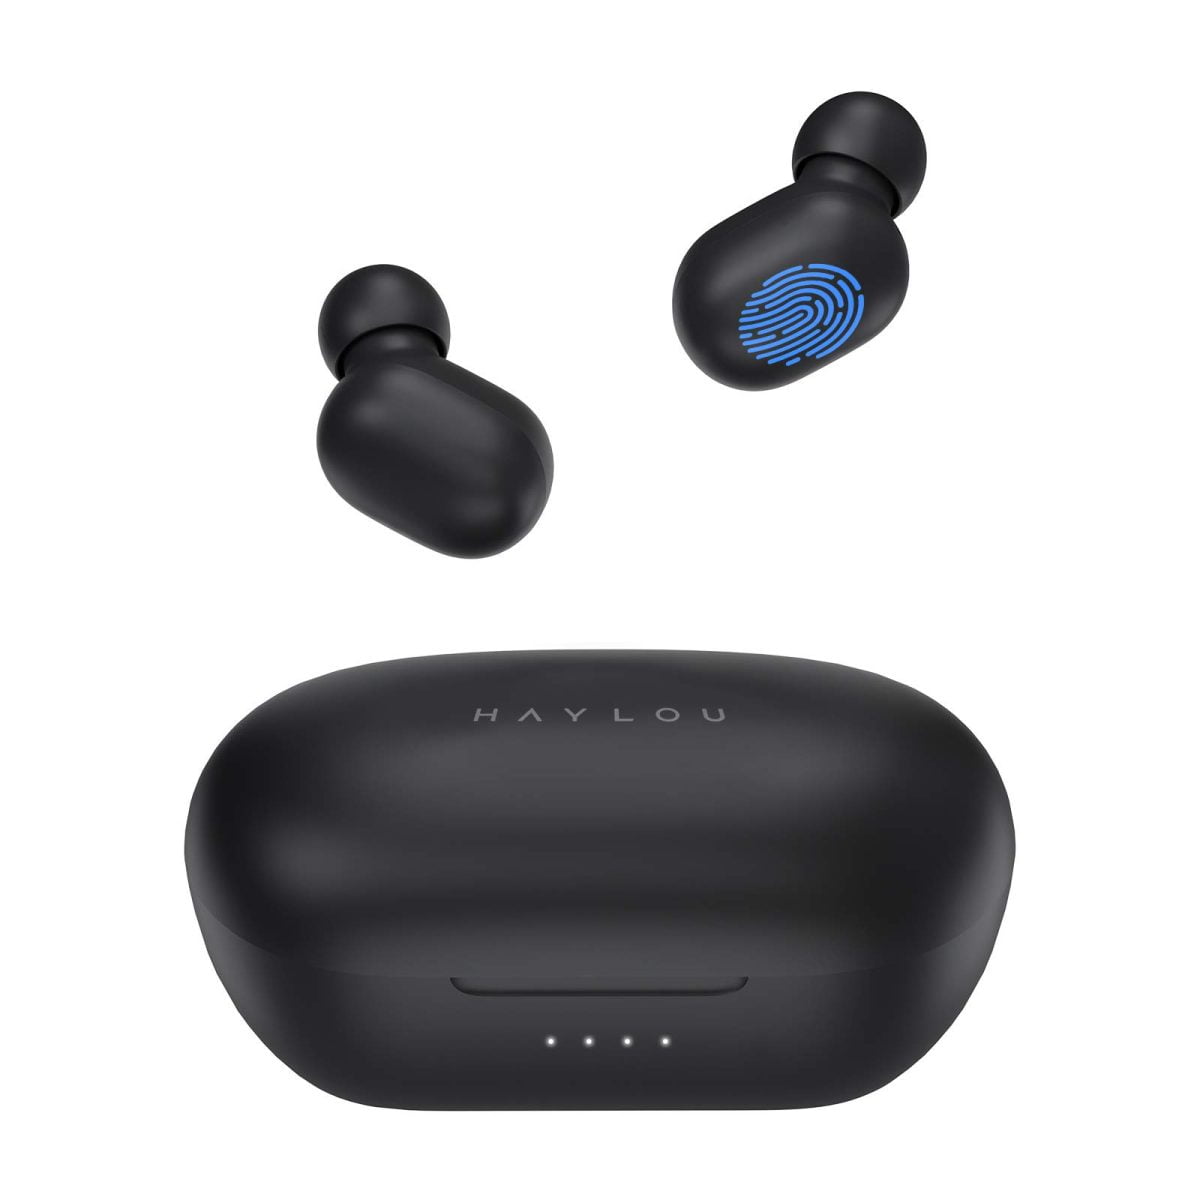 61Q2Vy8Qfil &Amp;Lt;H1&Amp;Gt;Haylou Gt1 Pro Tws Bluetooth Earbuds&Amp;Lt;/H1&Amp;Gt; Haylou Gt1 Pro Is An Improved Version Of The Haylou Gt1 Earbuds, Which Comes With A New Storage Case. The Latest Case Has A High-Capacity Battery And A Charge Indicator. Case Battery Capacity Increased To 800 Mah. With A New Storage Case, Battery Life Has Increased To 26 Hours. The Remaining Characteristics Of The Earbuds Are Similar To The Previous Model. Thanks To The Use Of The Chipset Based On Bluetooth 5.0, The Haylou Gt1 Pro Offers An Independent Connection Of Each Earbud To The Sound Source. This Reduces The Likelihood Of Losing Communication Between The Earbuds And The Device. The Inclusion Of The Game Mode Allows You To Reduce The Sound Delay To 65 Milliseconds And Get The Surround Effect In Dynamic Games. Aac Codec Is Supported. Bluetooth Earbds Haylou Gt1 Pro Bluetooth Earbuds